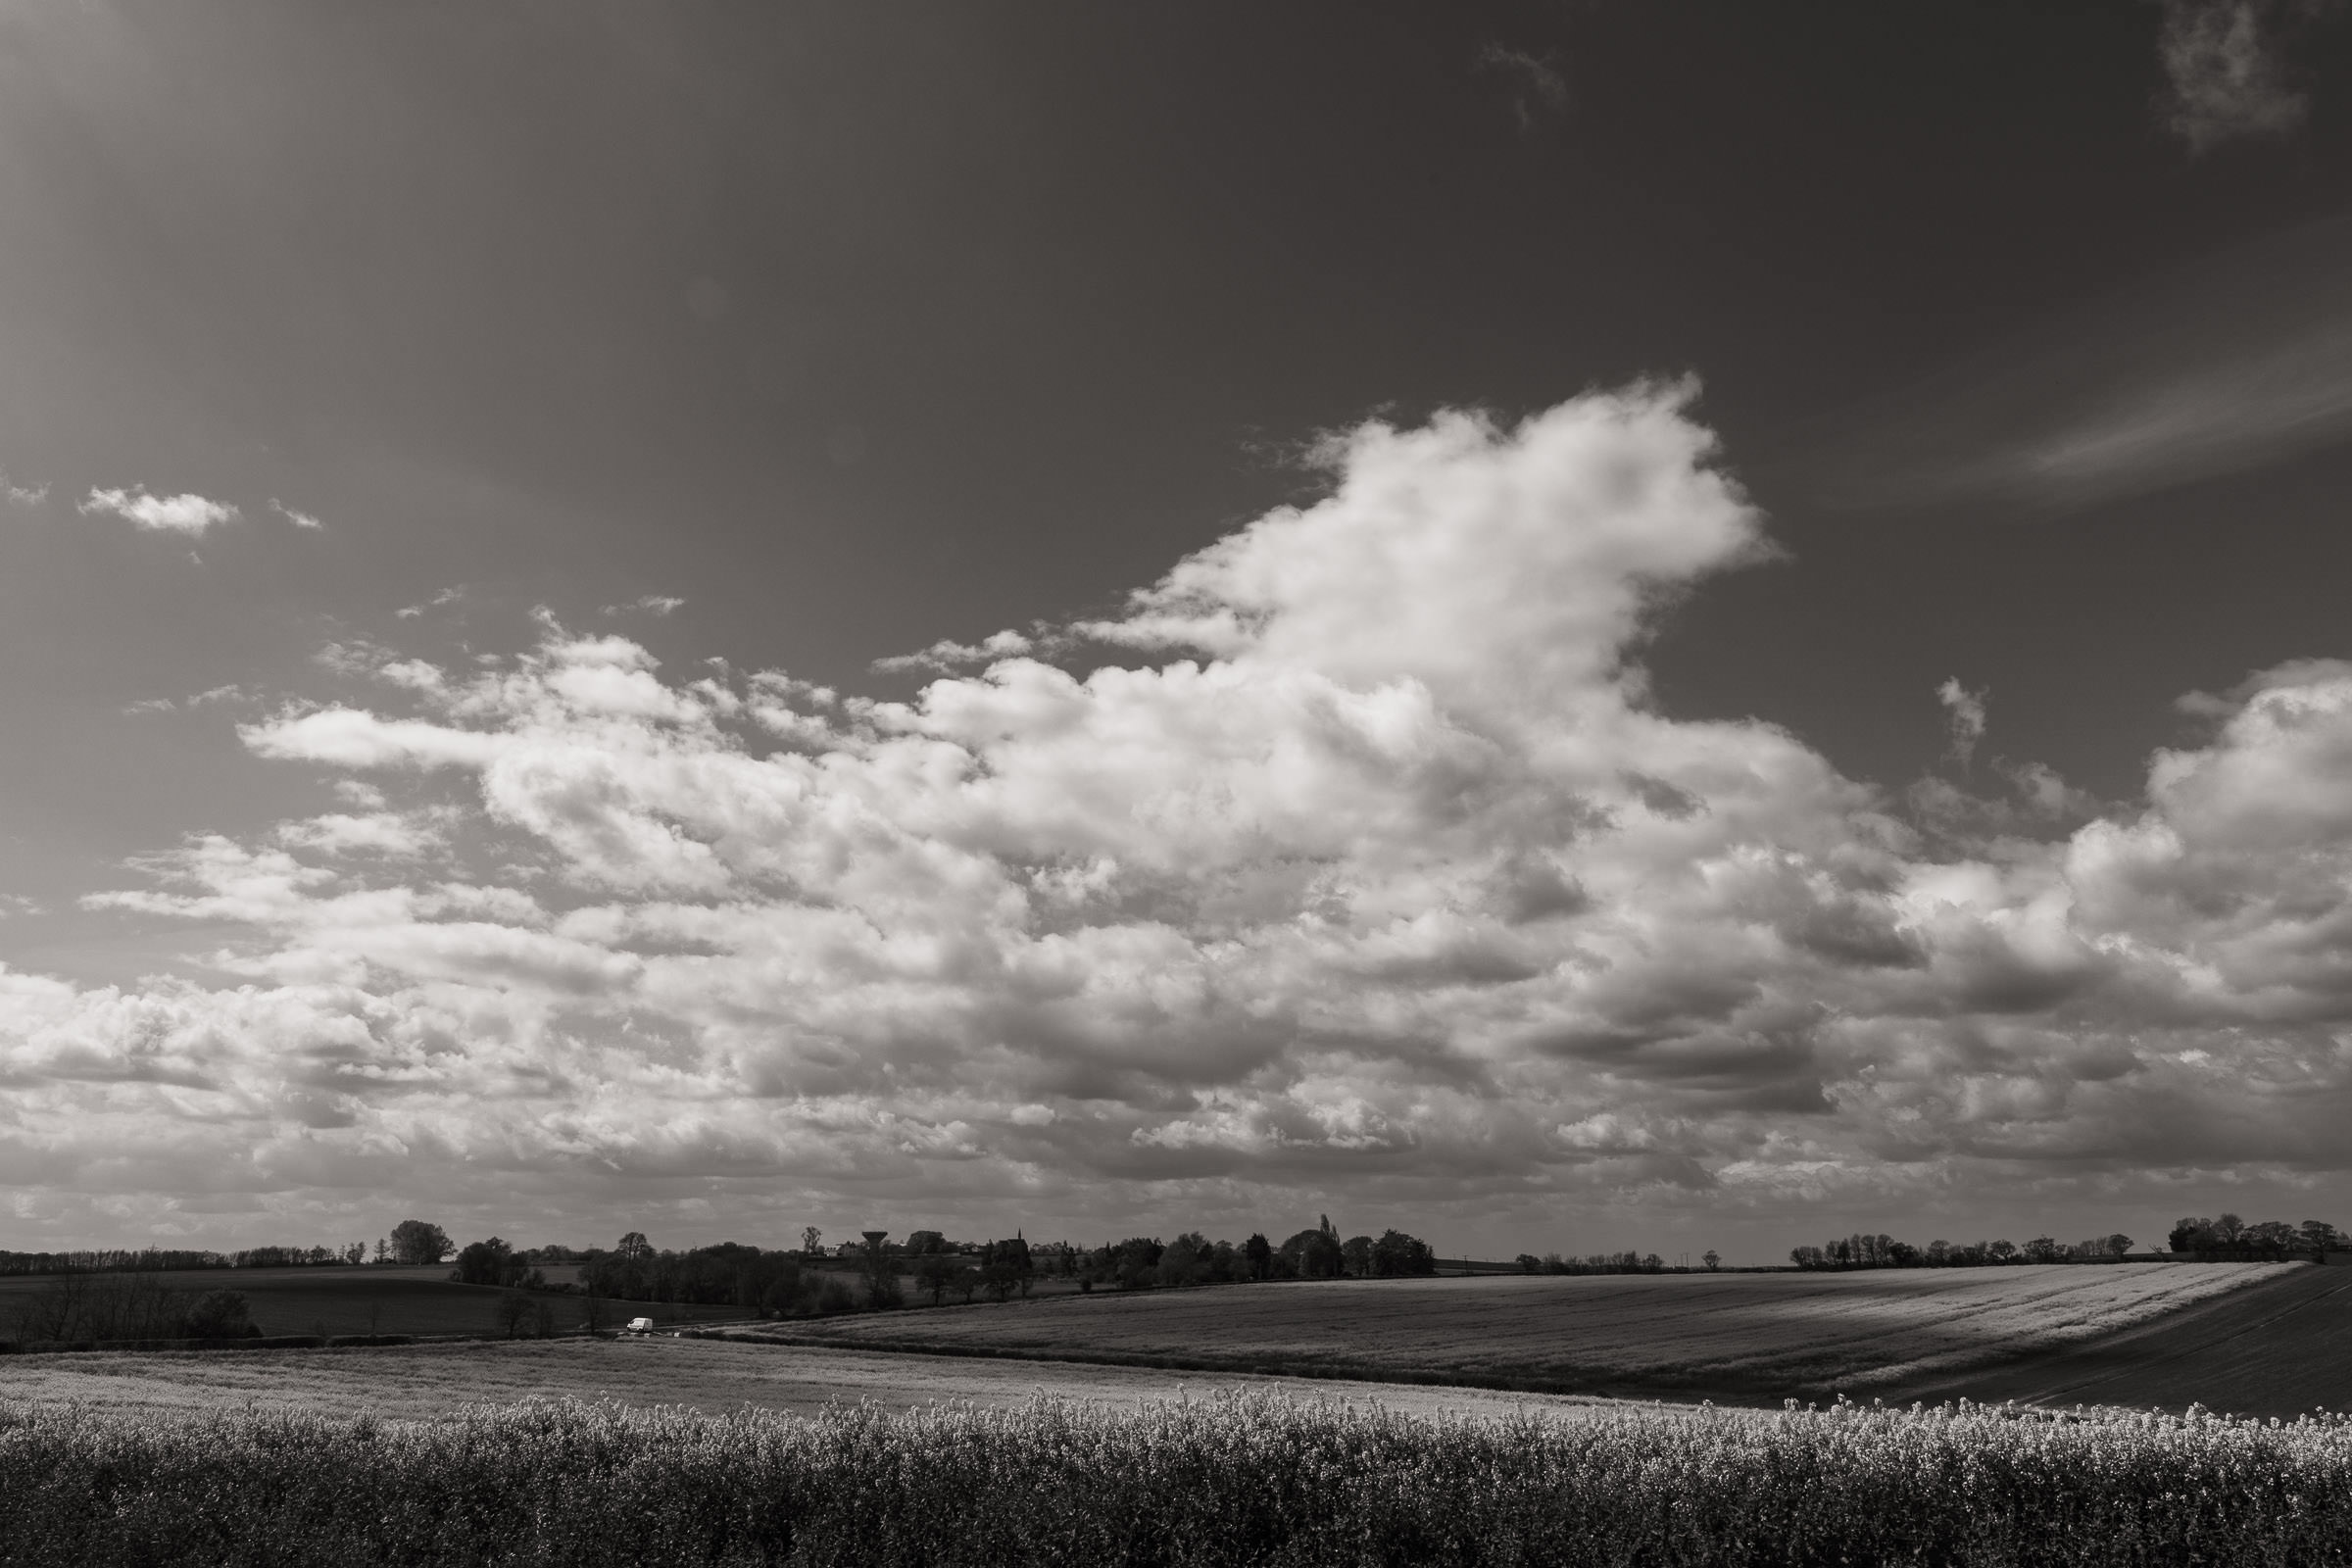 From Essex & Maldon wedding photographer. A black and white landscape photograph of a view over Bradwell Road and Maldon Road looking towards Southminster. From Highfields wedding venue in Bradwell-on-Sea.